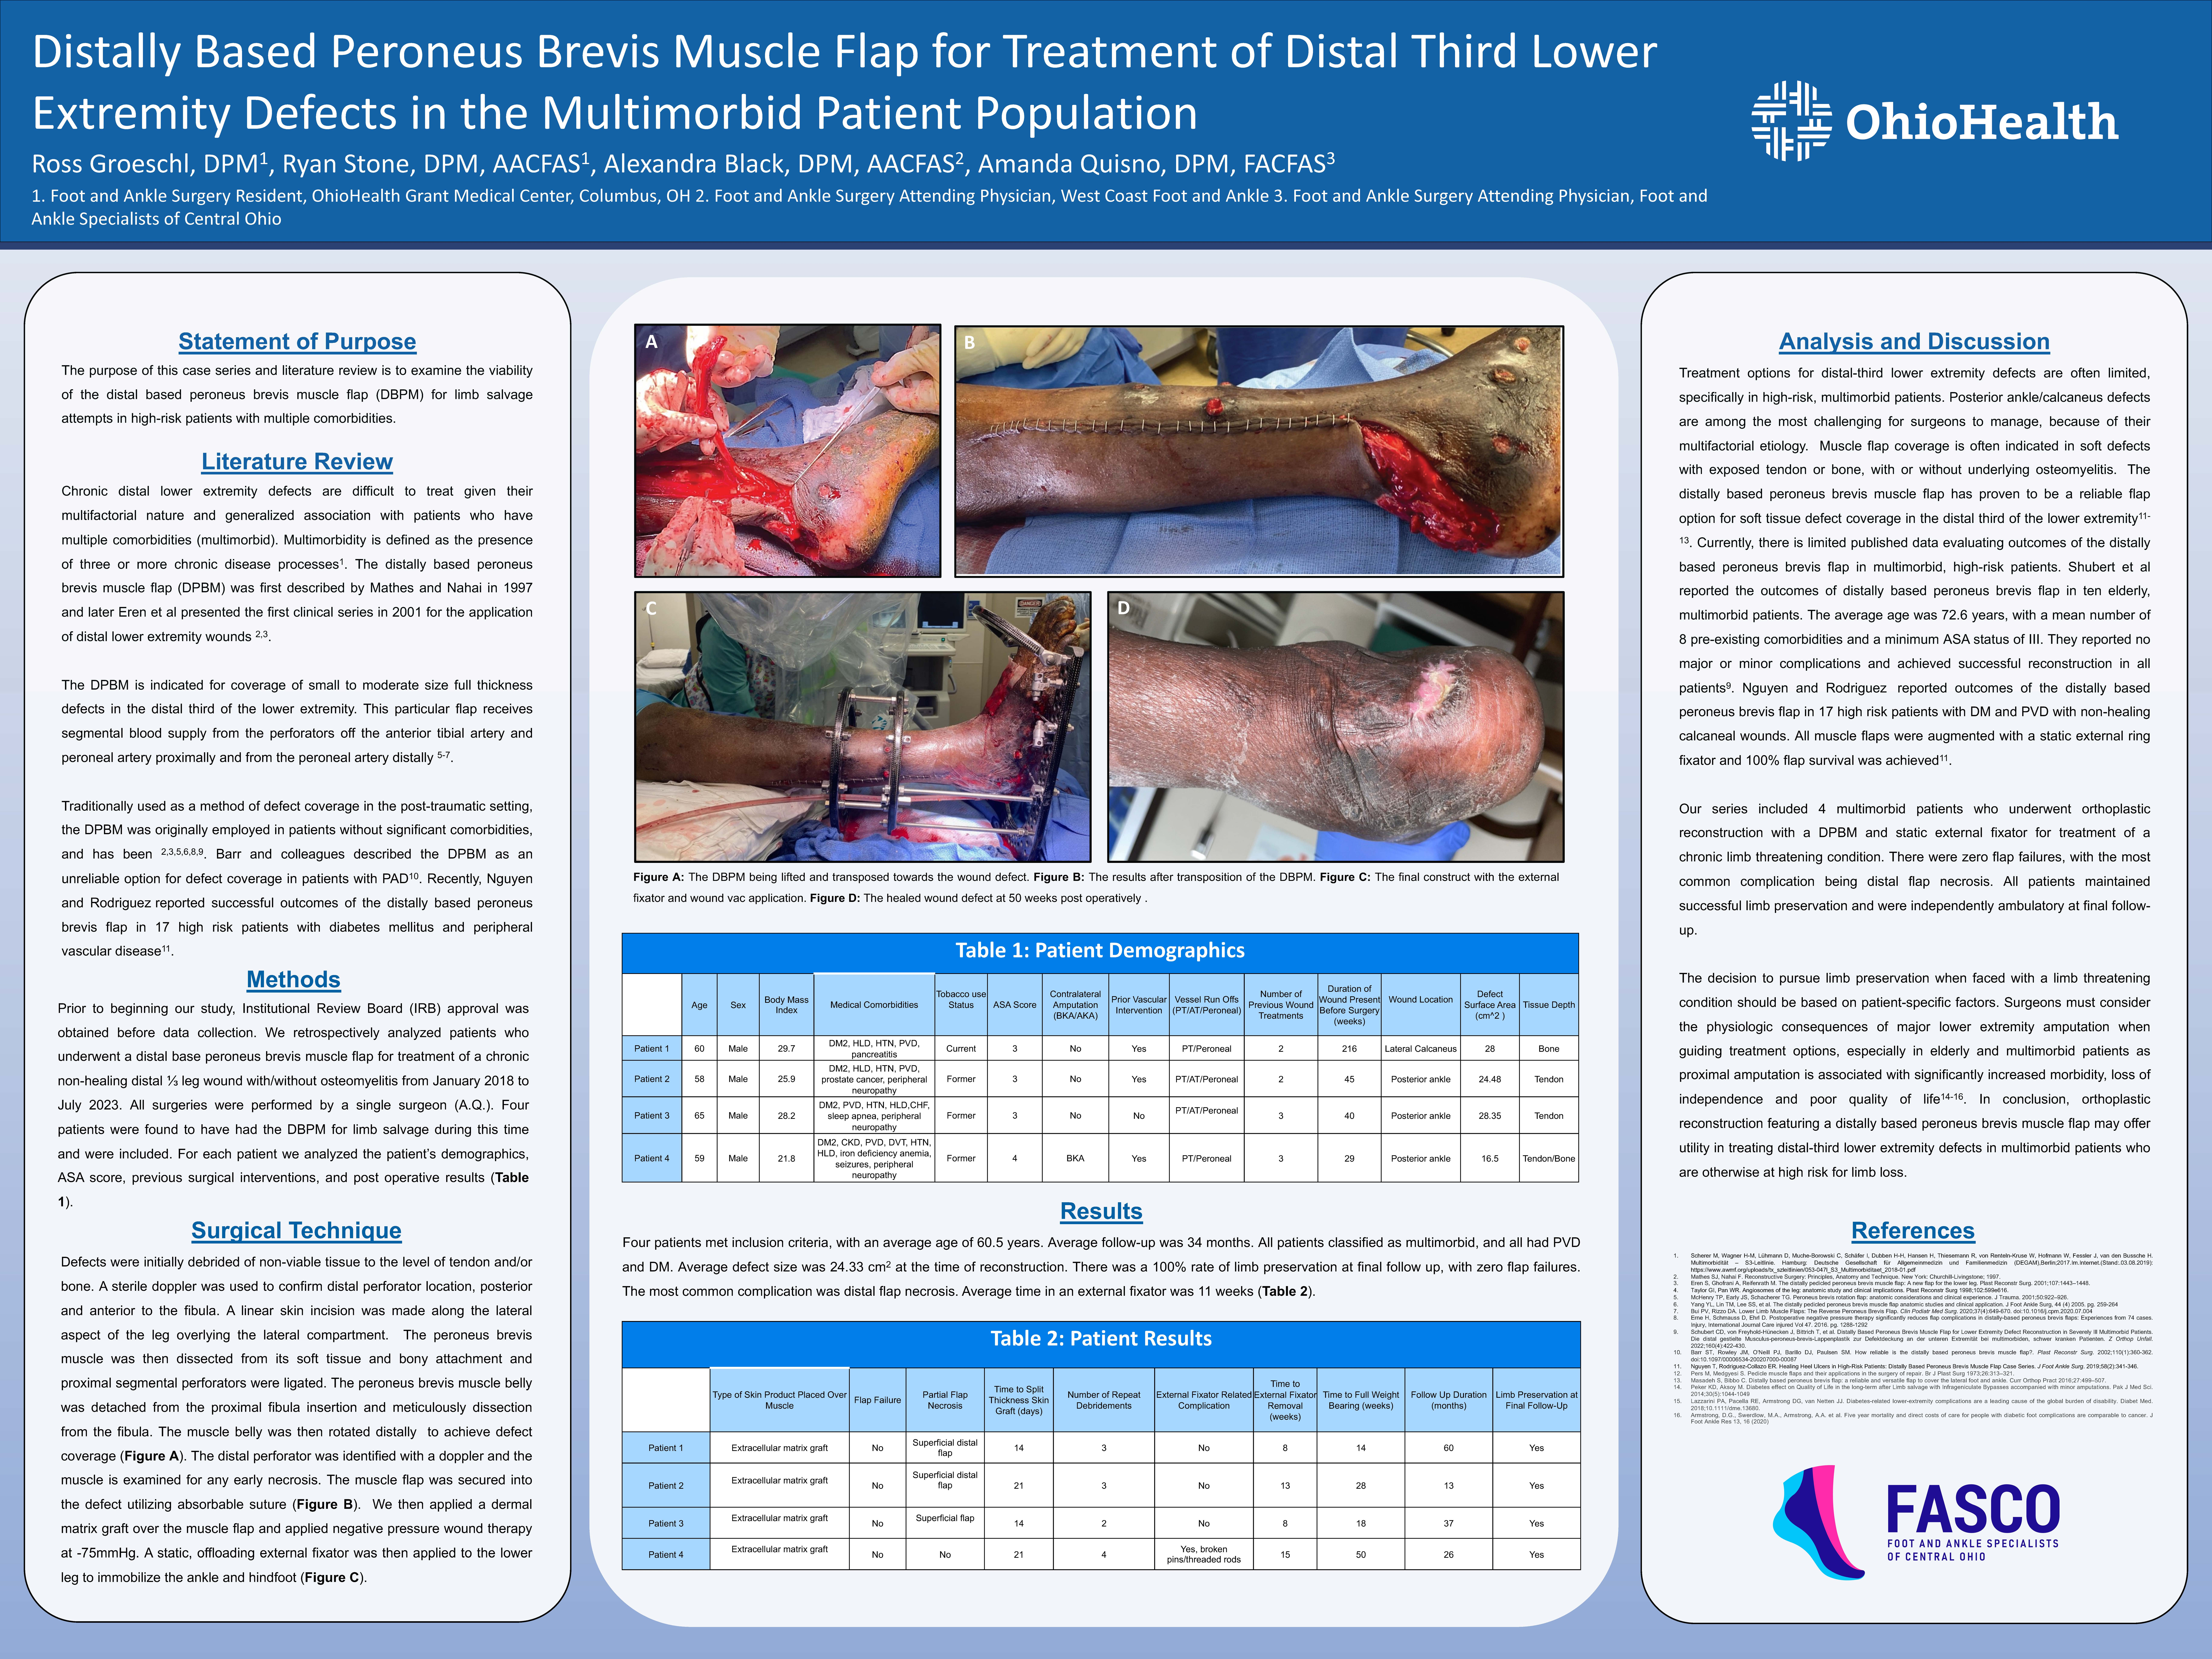 Distally Based Peroneus Brevis Muscle Flap for Treatment of Distal Third Lower Extremity Defects in the Multimorbid Patient Population